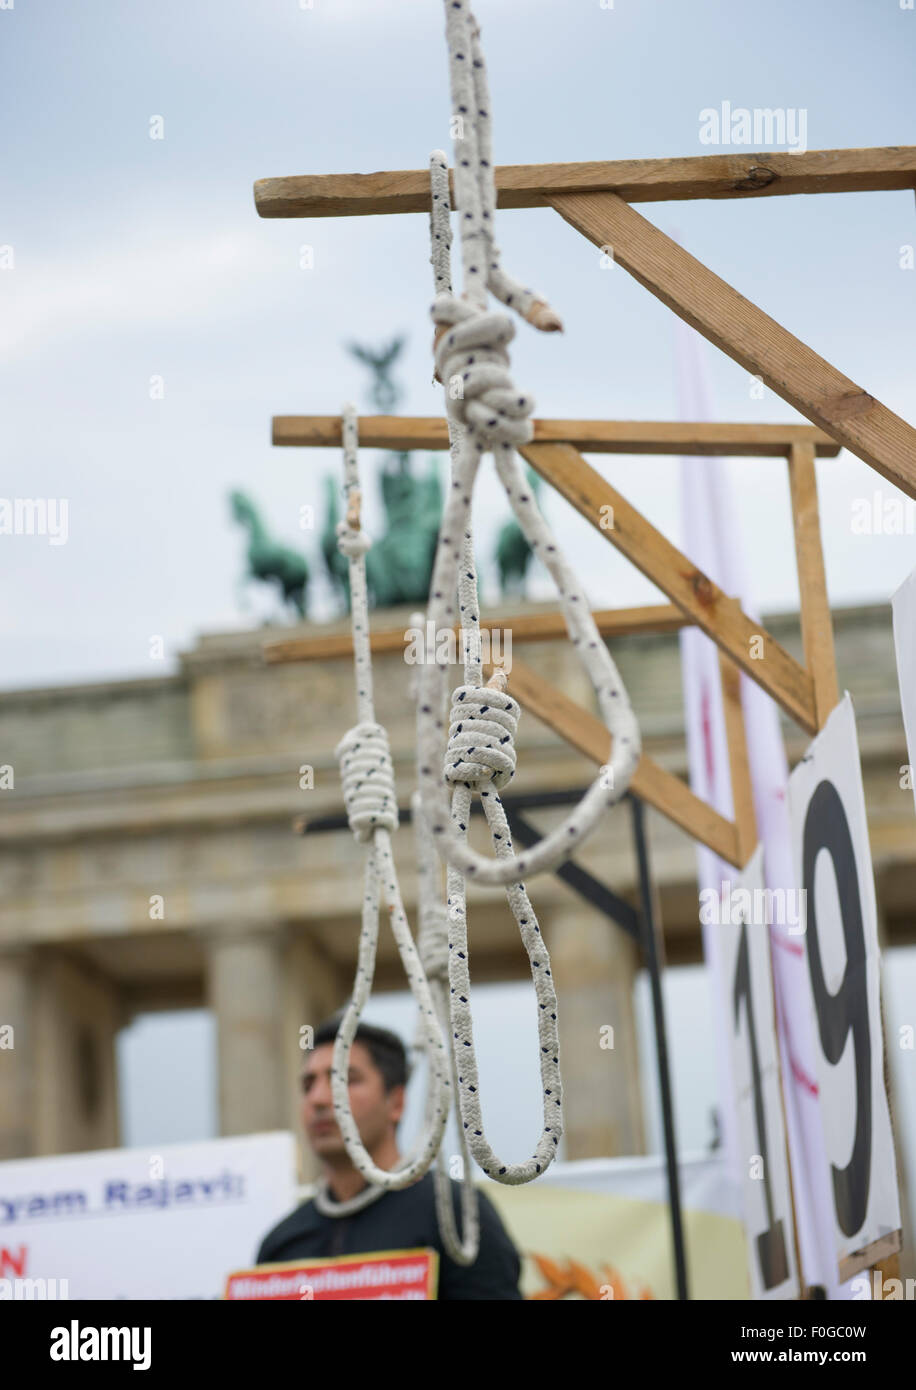 Berlin, Germany. 15th Aug, 2015. The noose of symbolic gallows that have been set up in front of the Brandenburg Gate in Berlin, Germany, 15 August 2015. The Deutsch-Iranische Gesellschaft (lit. German-Iranian Society) held an event on the Pariser Platz square to protest against executions in Iran. Photo: PAUL ZINKEN/dpa/Alamy Live News Stock Photo